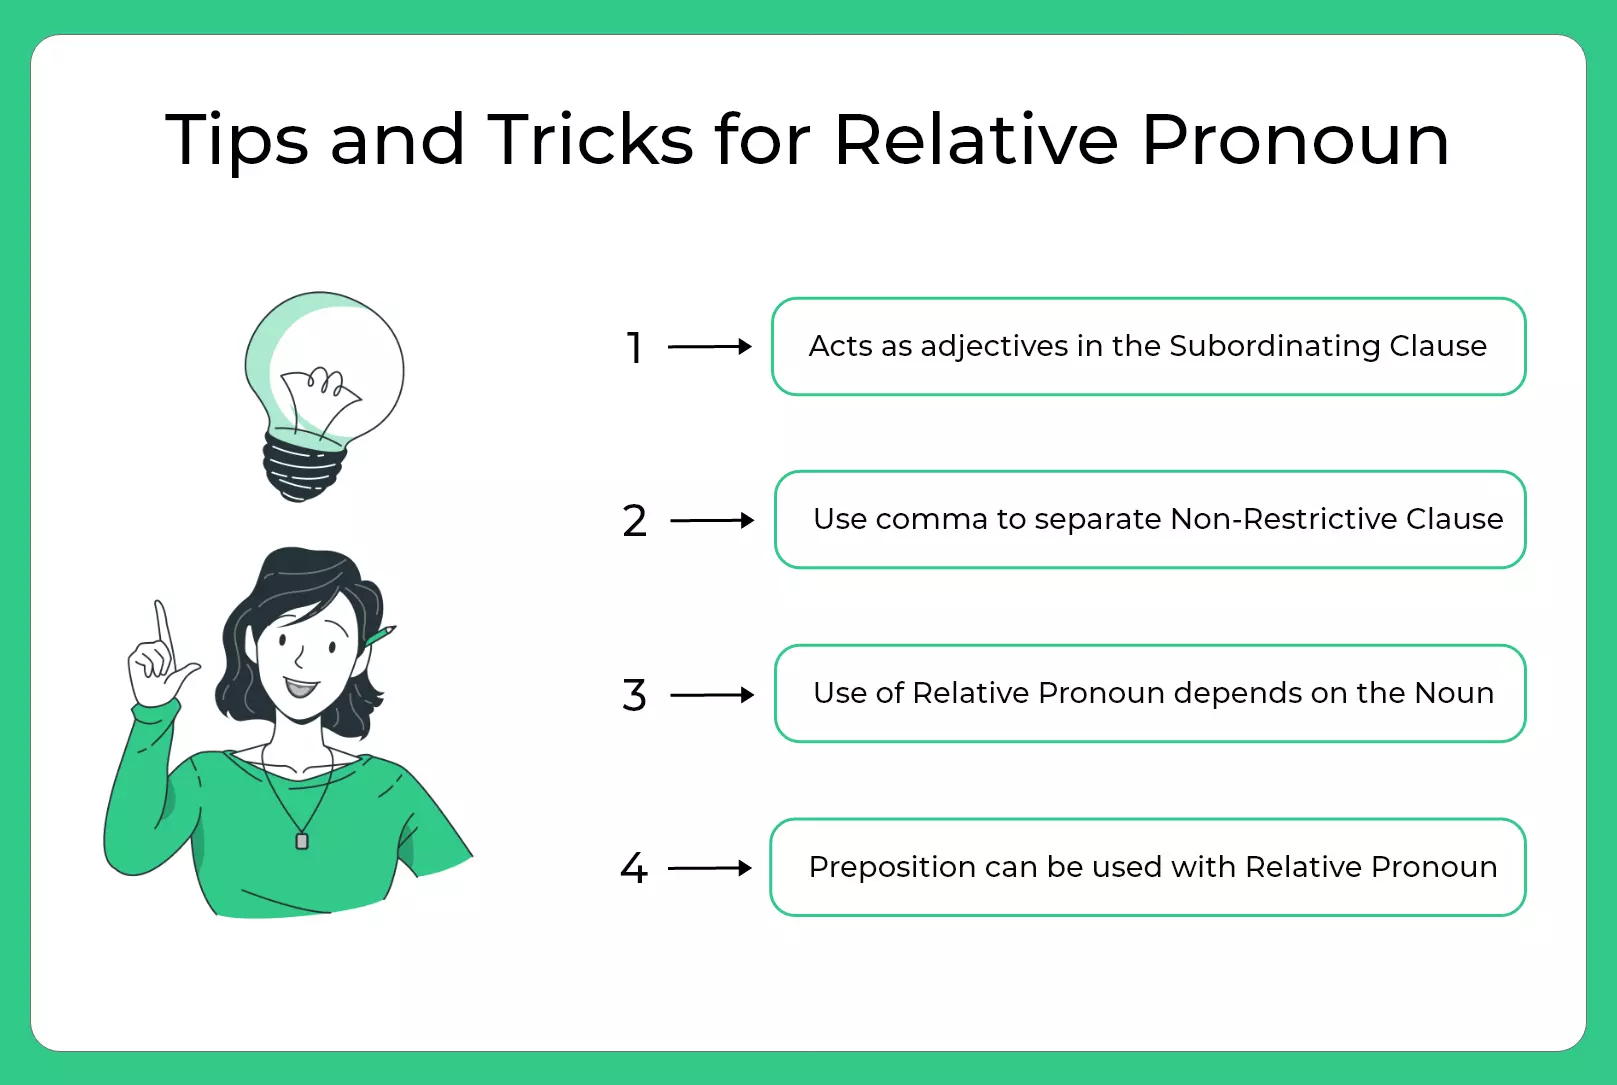 Tips and Tricks for Relative Pronoun